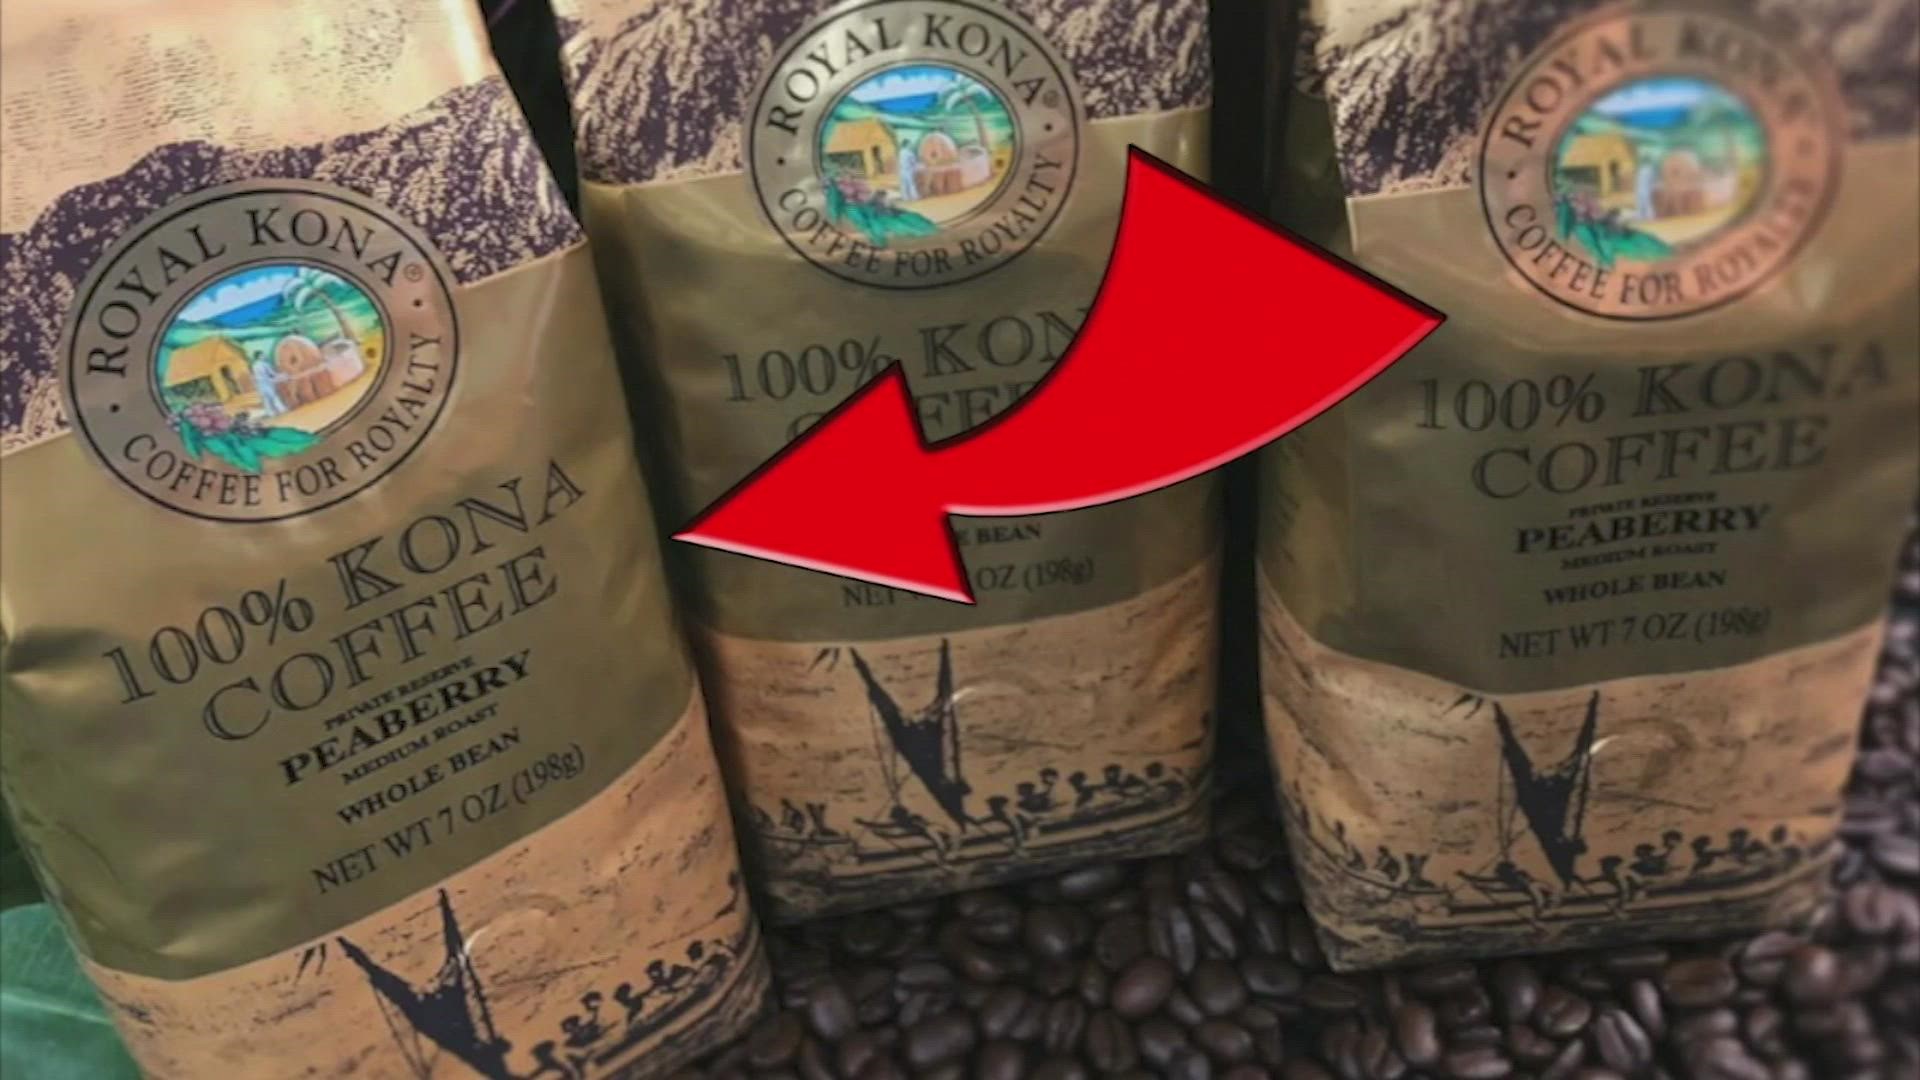 Lawsuit, coffee groups say check for where products are made | John Matarese reports